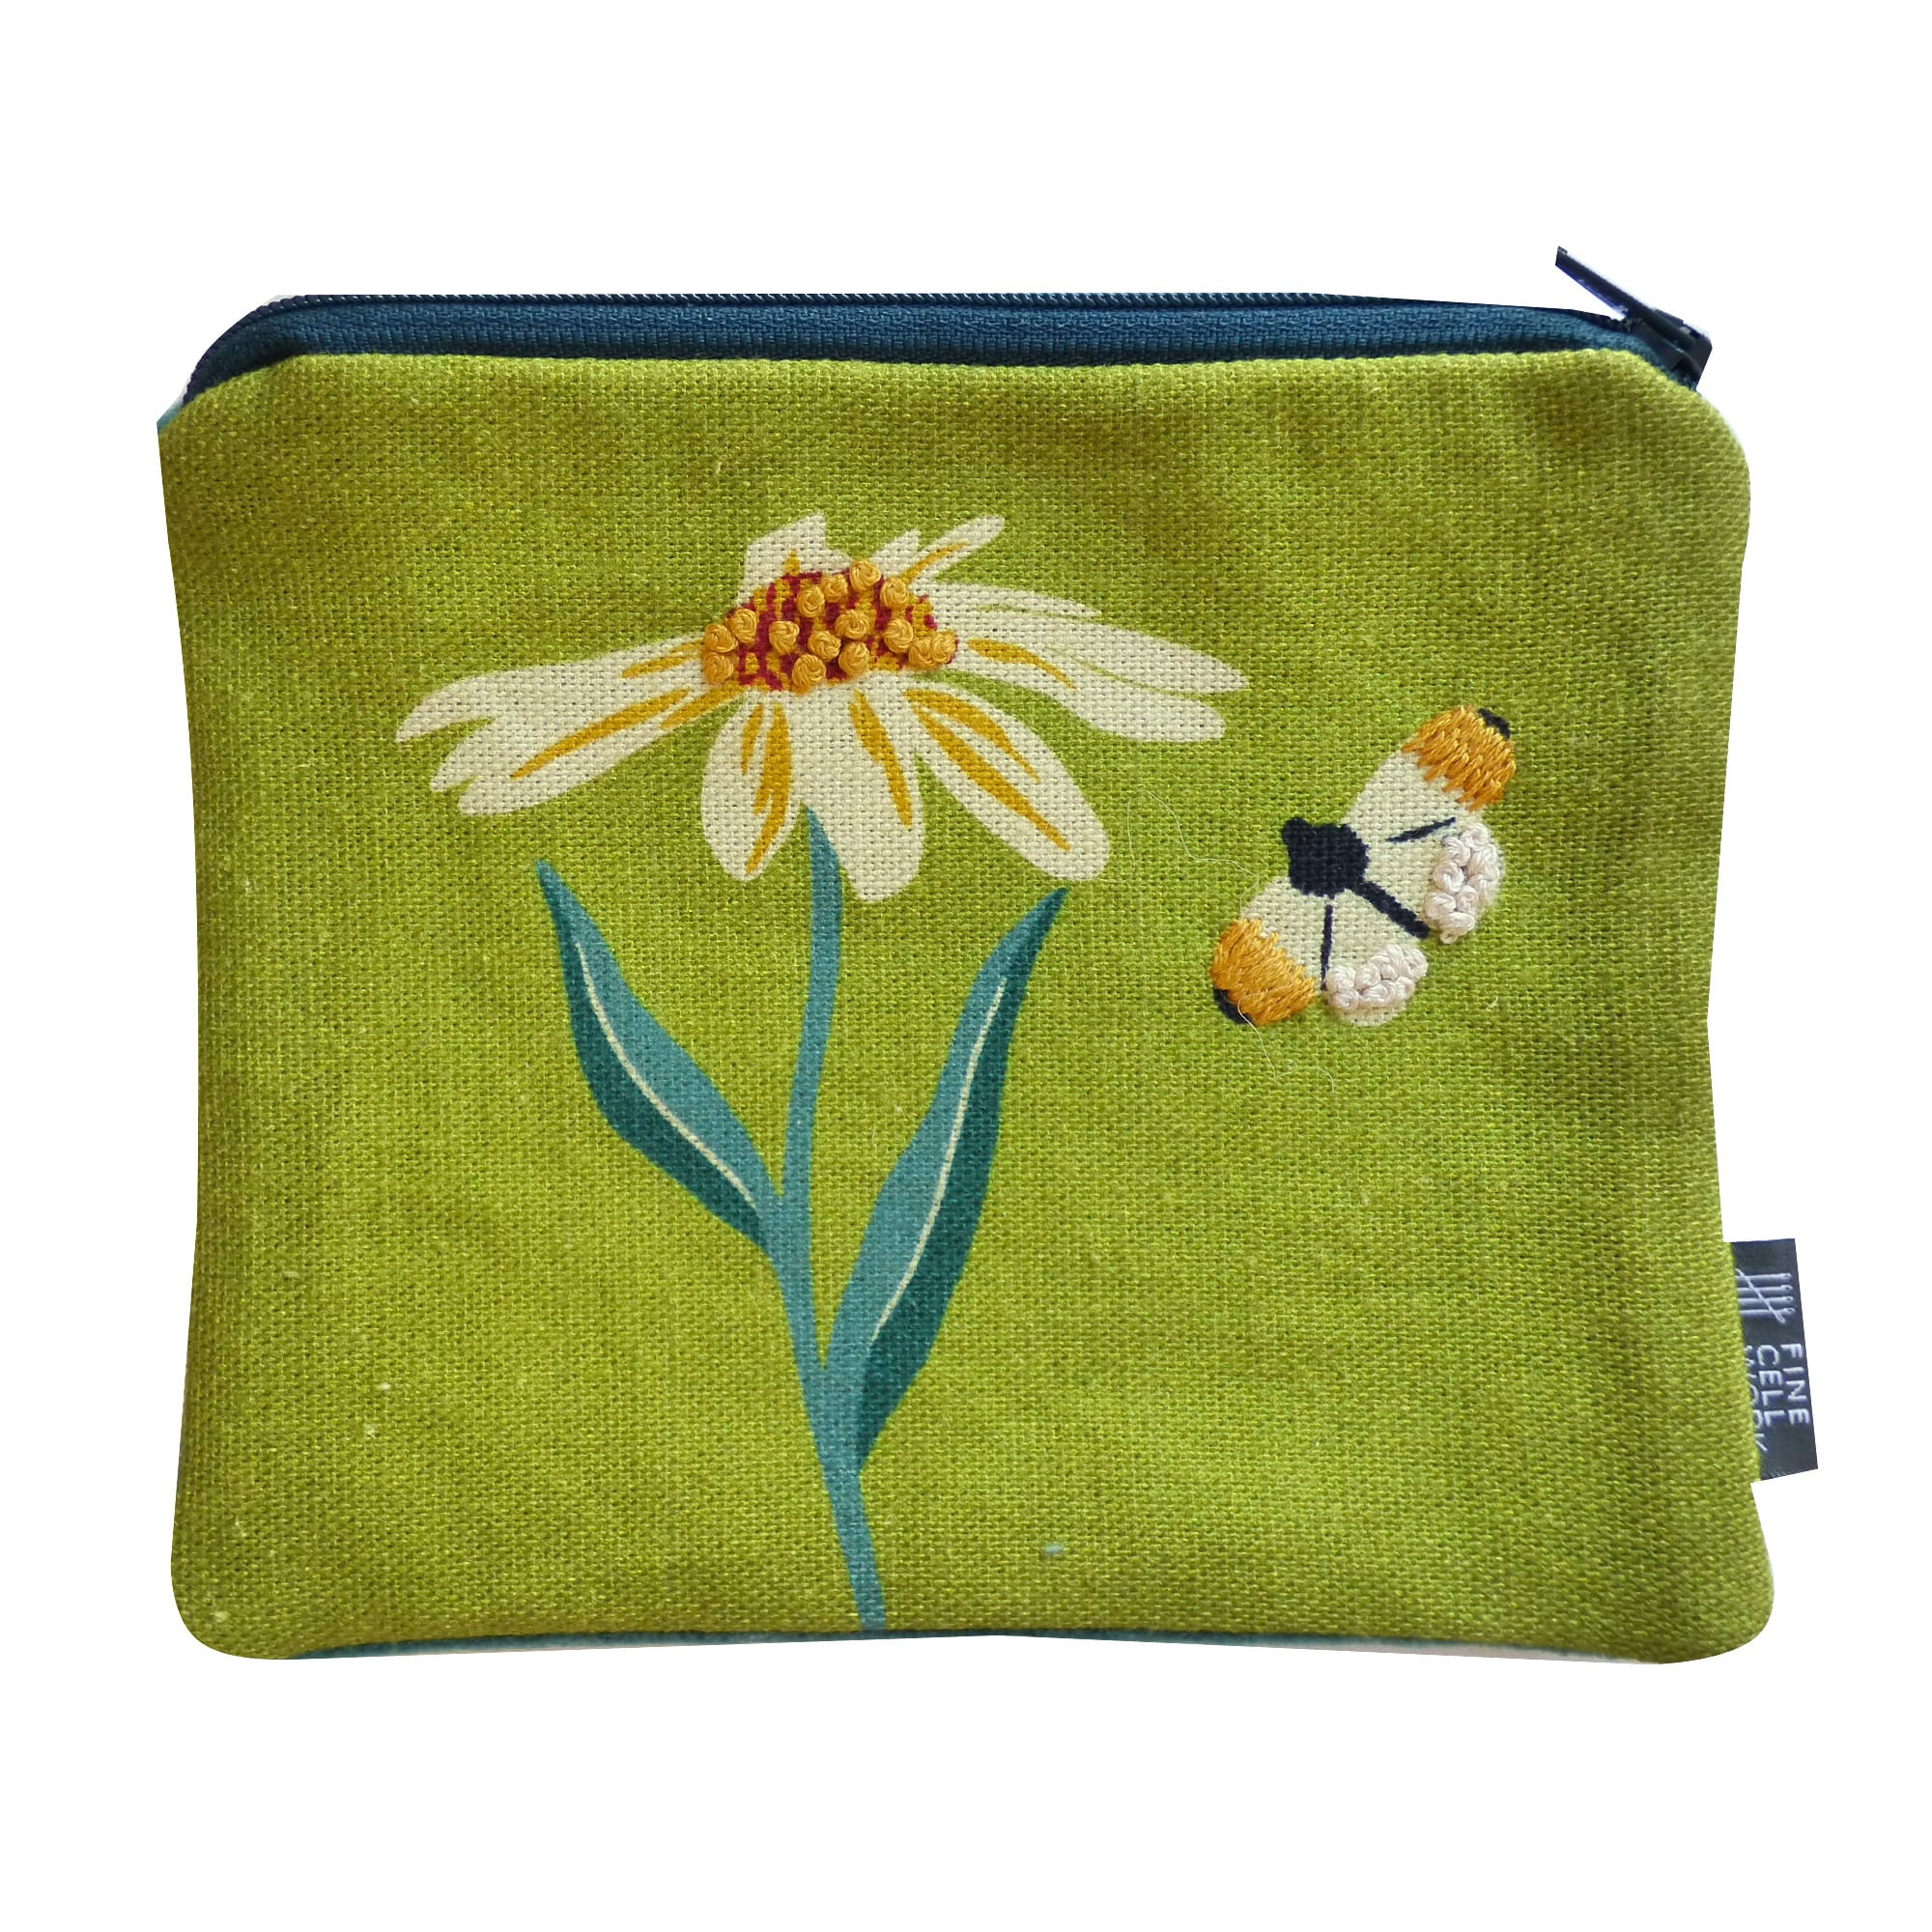 Joy-of-Print-hand-Embroidered-Bee-and-daisy-Teal-Purse-min.jpg